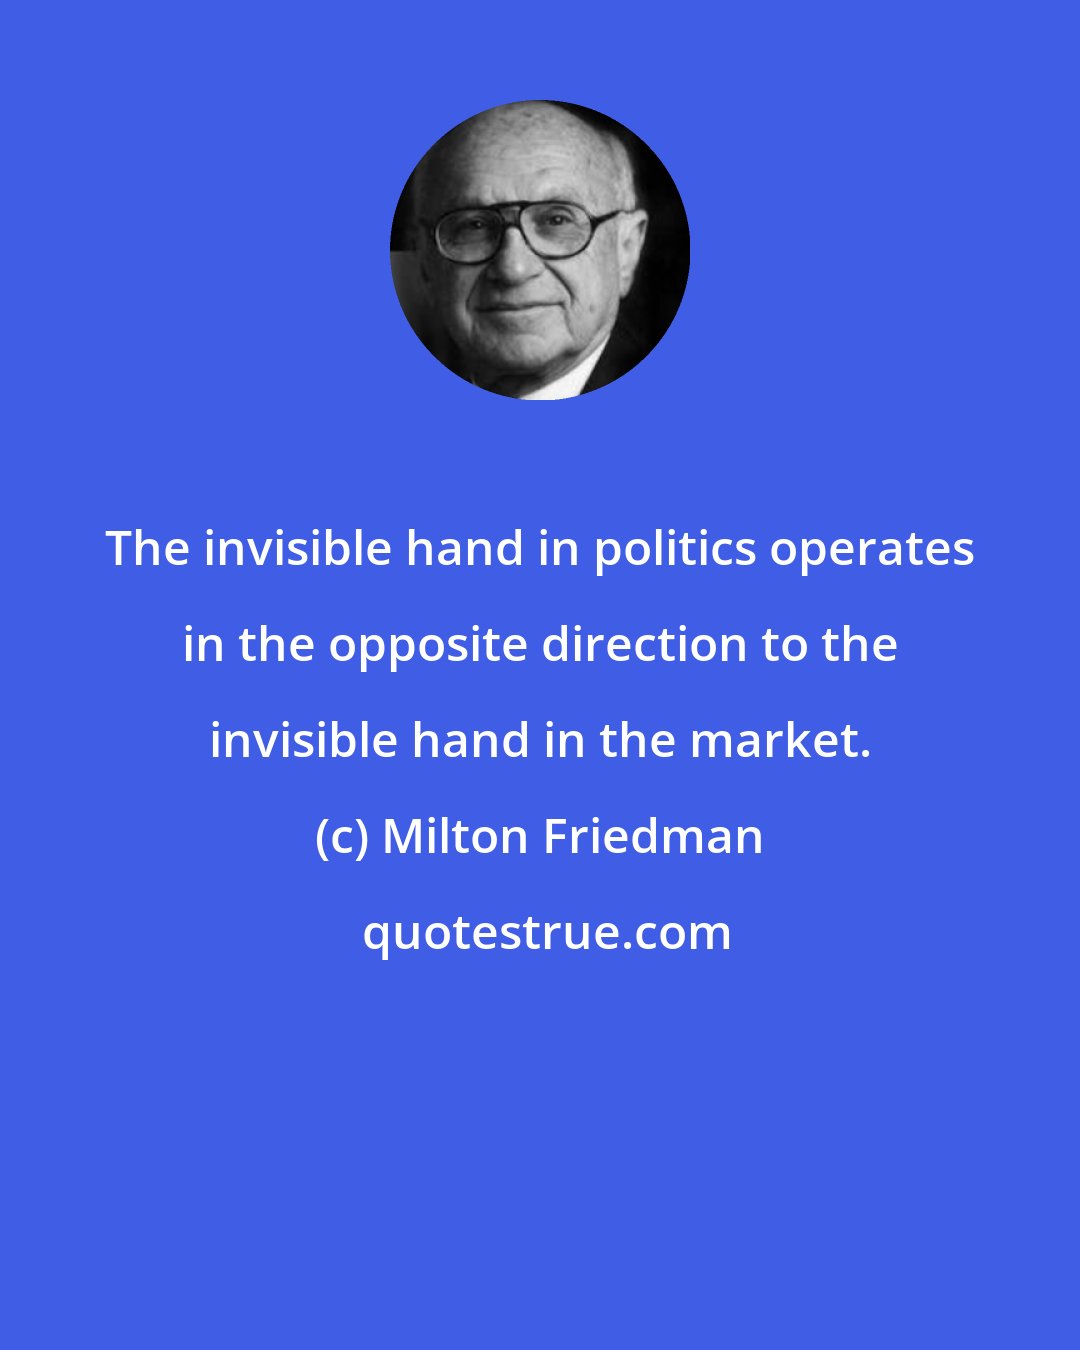 Milton Friedman: The invisible hand in politics operates in the opposite direction to the invisible hand in the market.